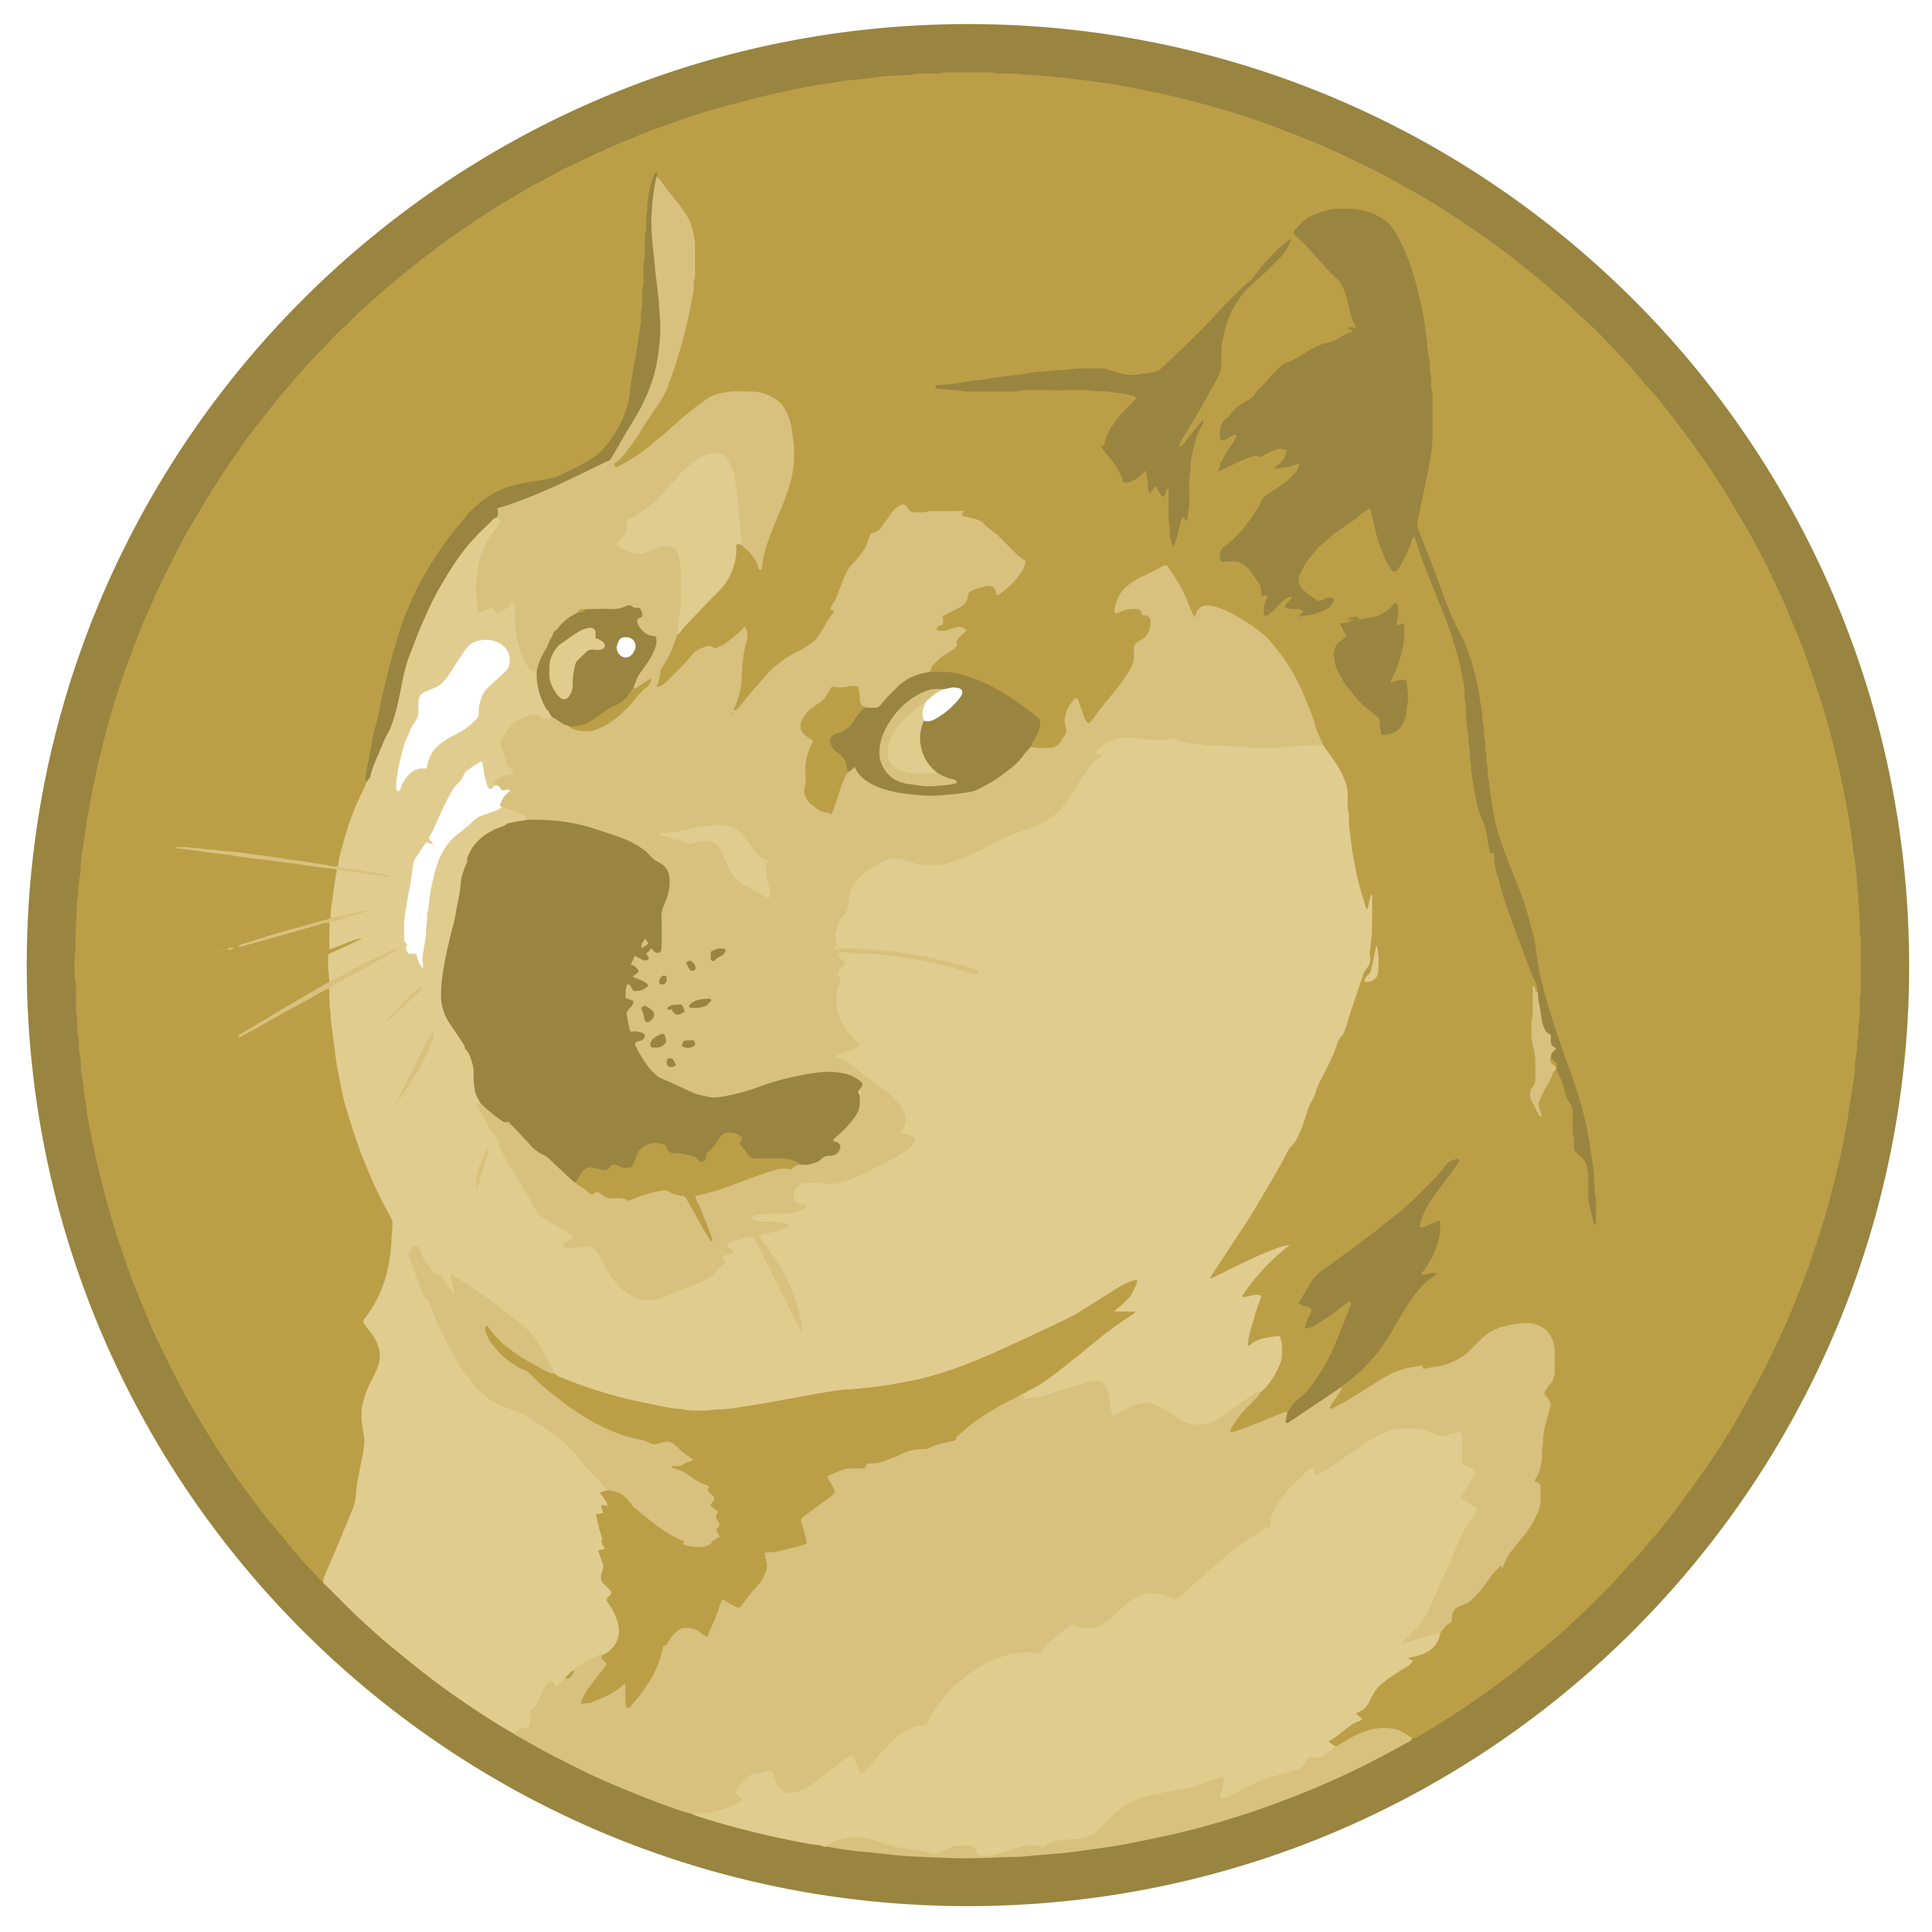 Dogecoin Logo - Update) Dogecoin transparent PNG archive needs your help shibes ...